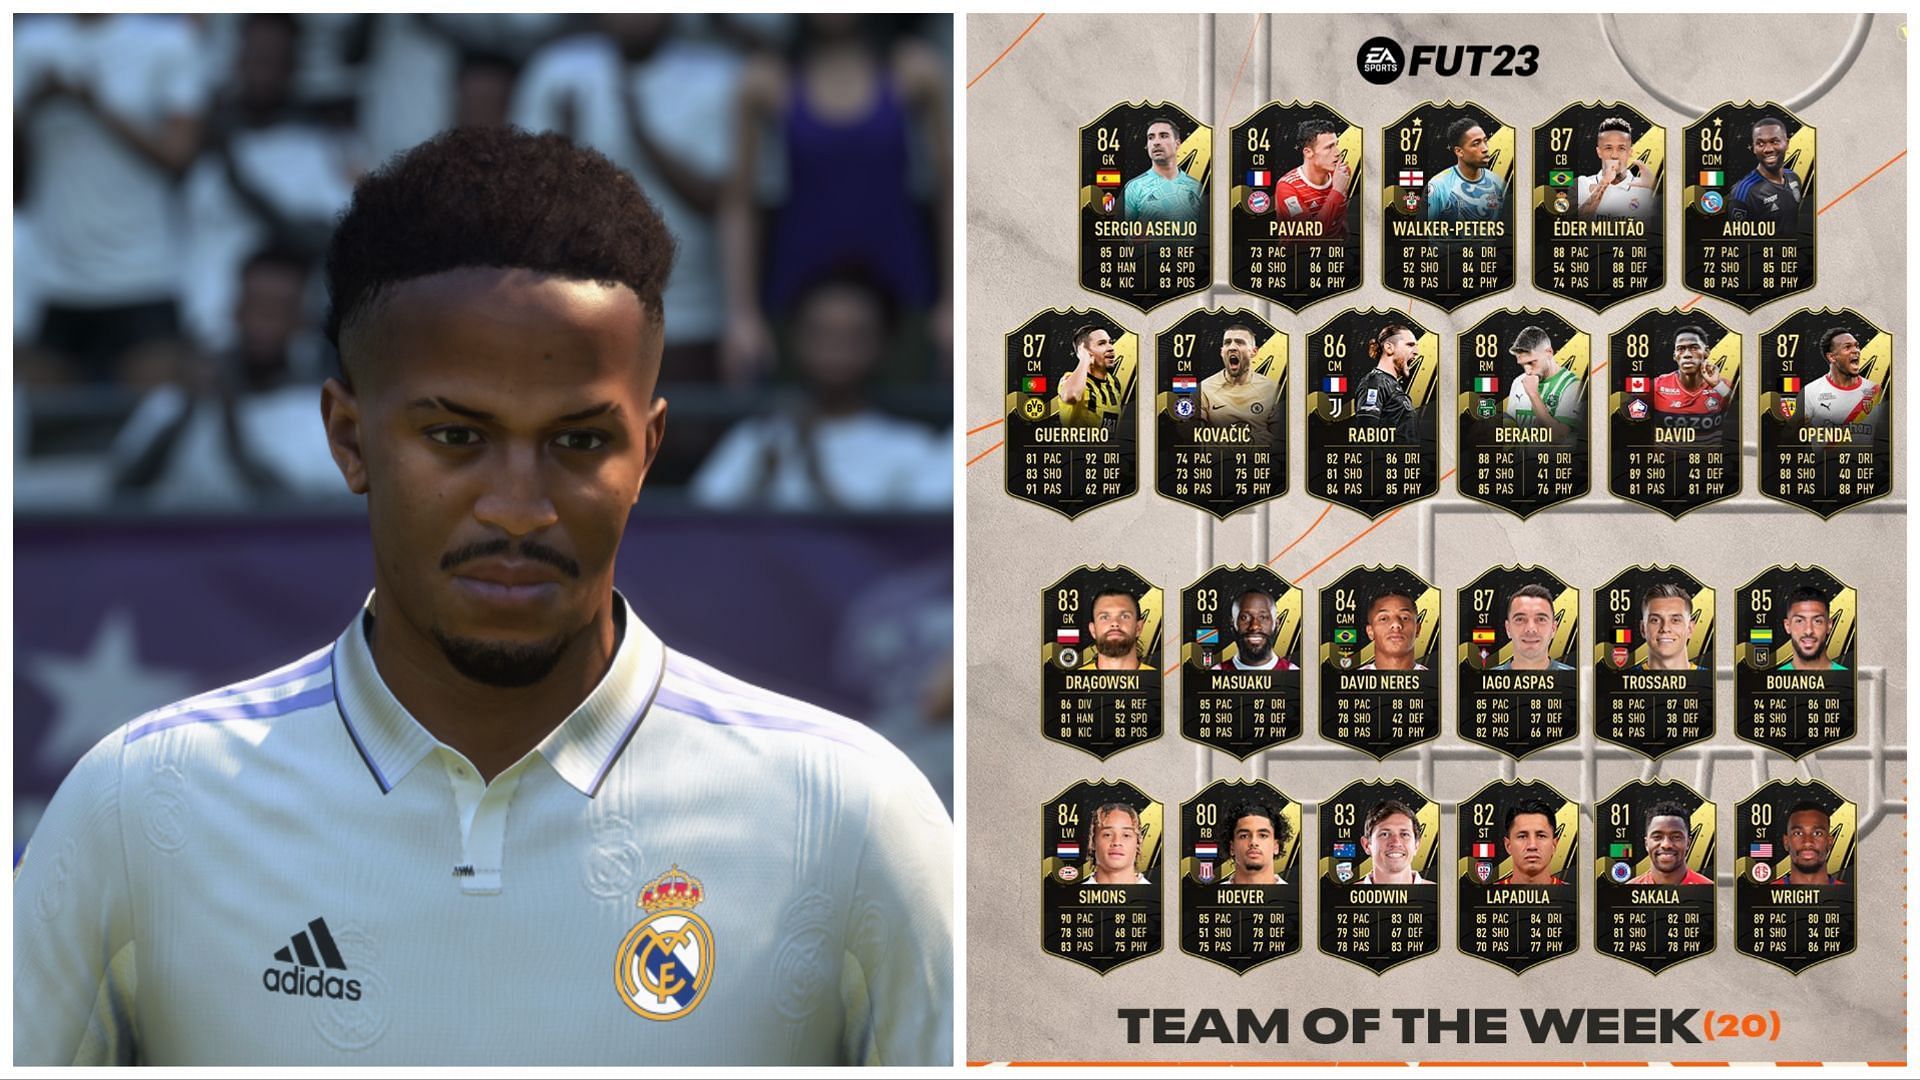 TOTW 20 is now live in FIFA 23 (Images via EA Sports)